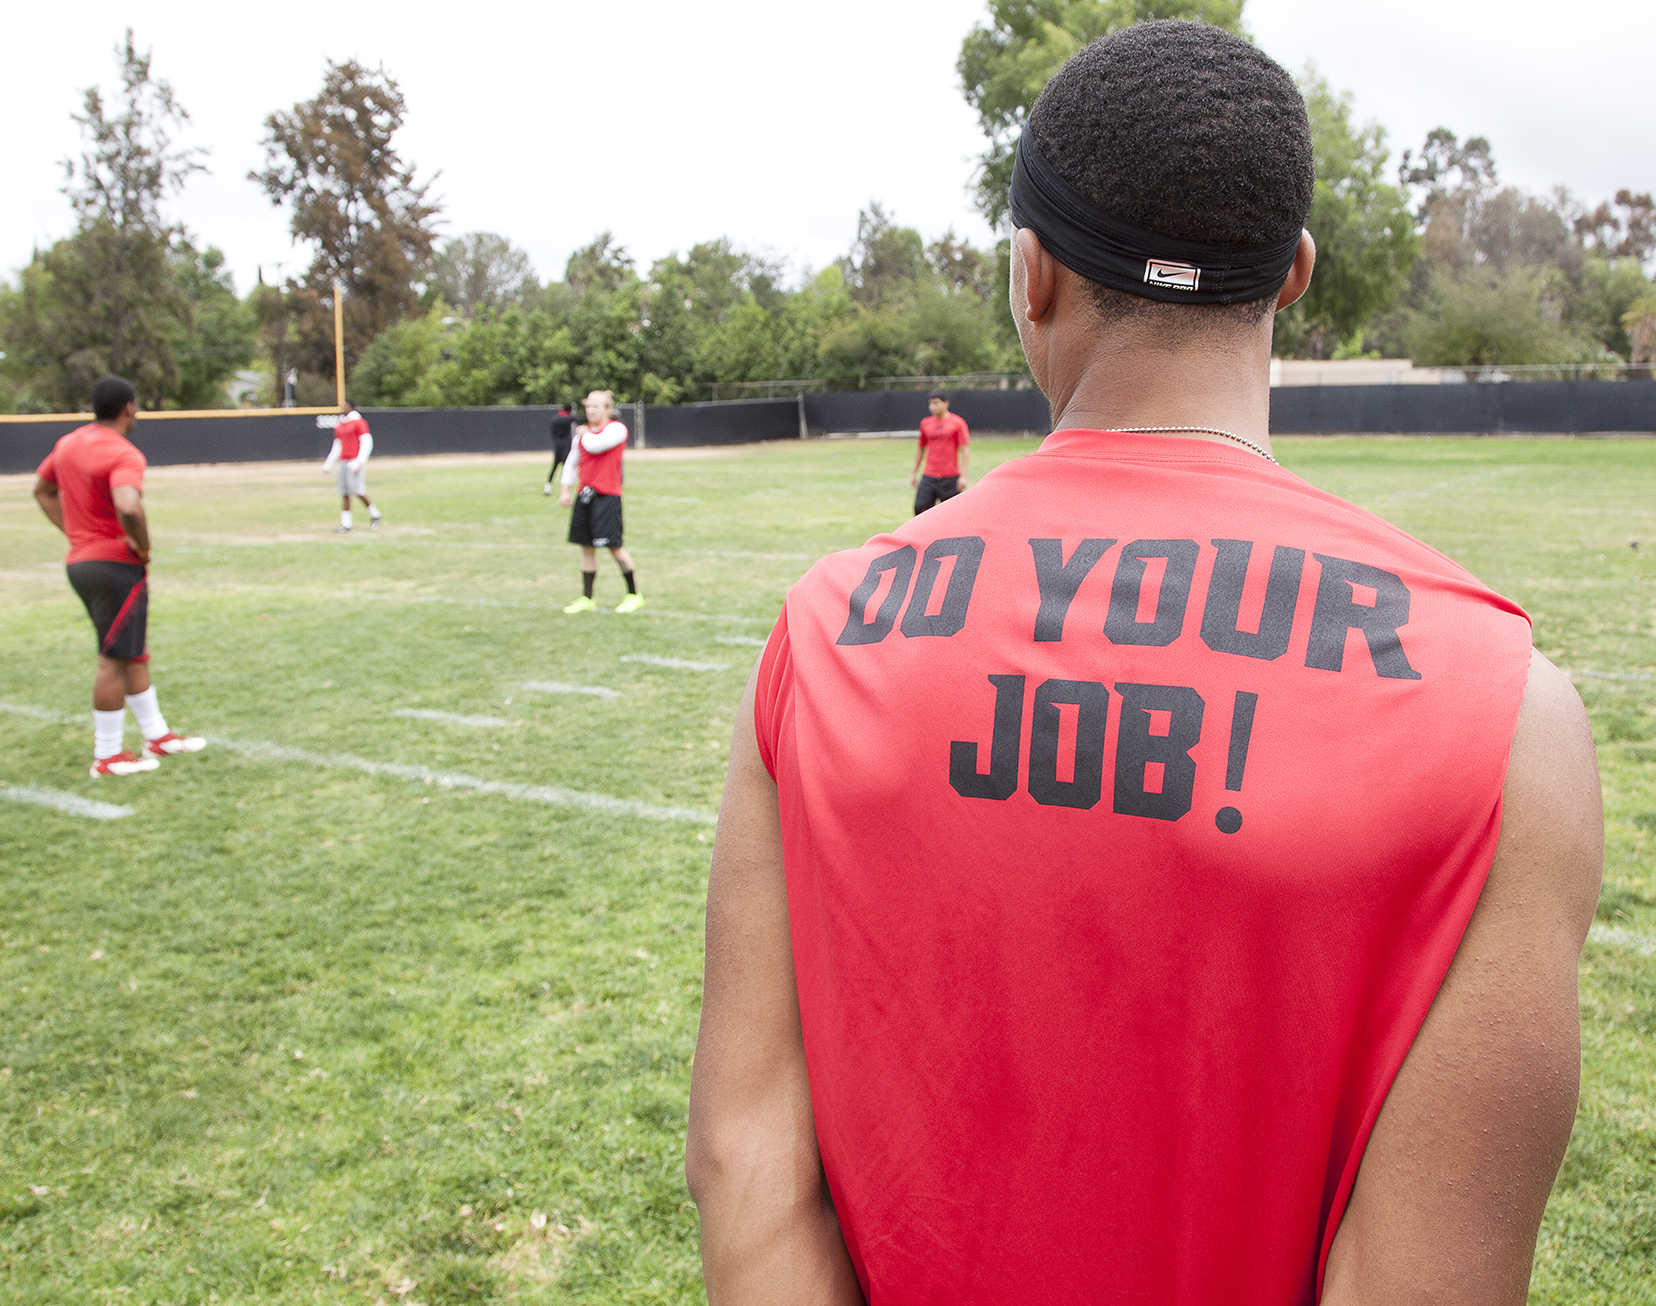  Players on the Pierce College football team wear uniforms that say "Do your job!" during a spring practice and training session on a field adjacent to Joe Kelly baseball field on Thursday, May 14, 2015. Woodland Hills, Calif.&nbsp; 